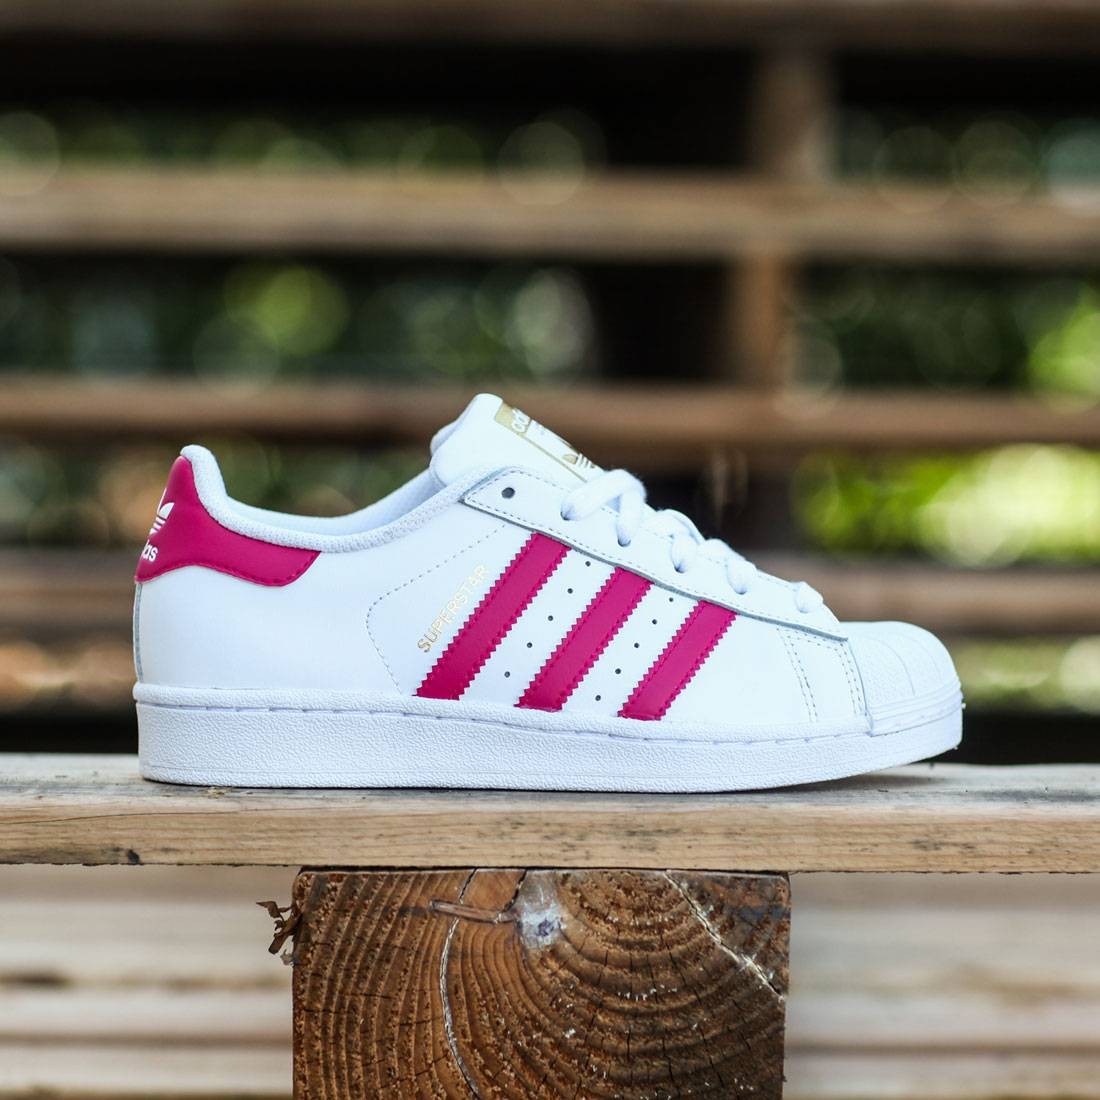 white and pink adidas